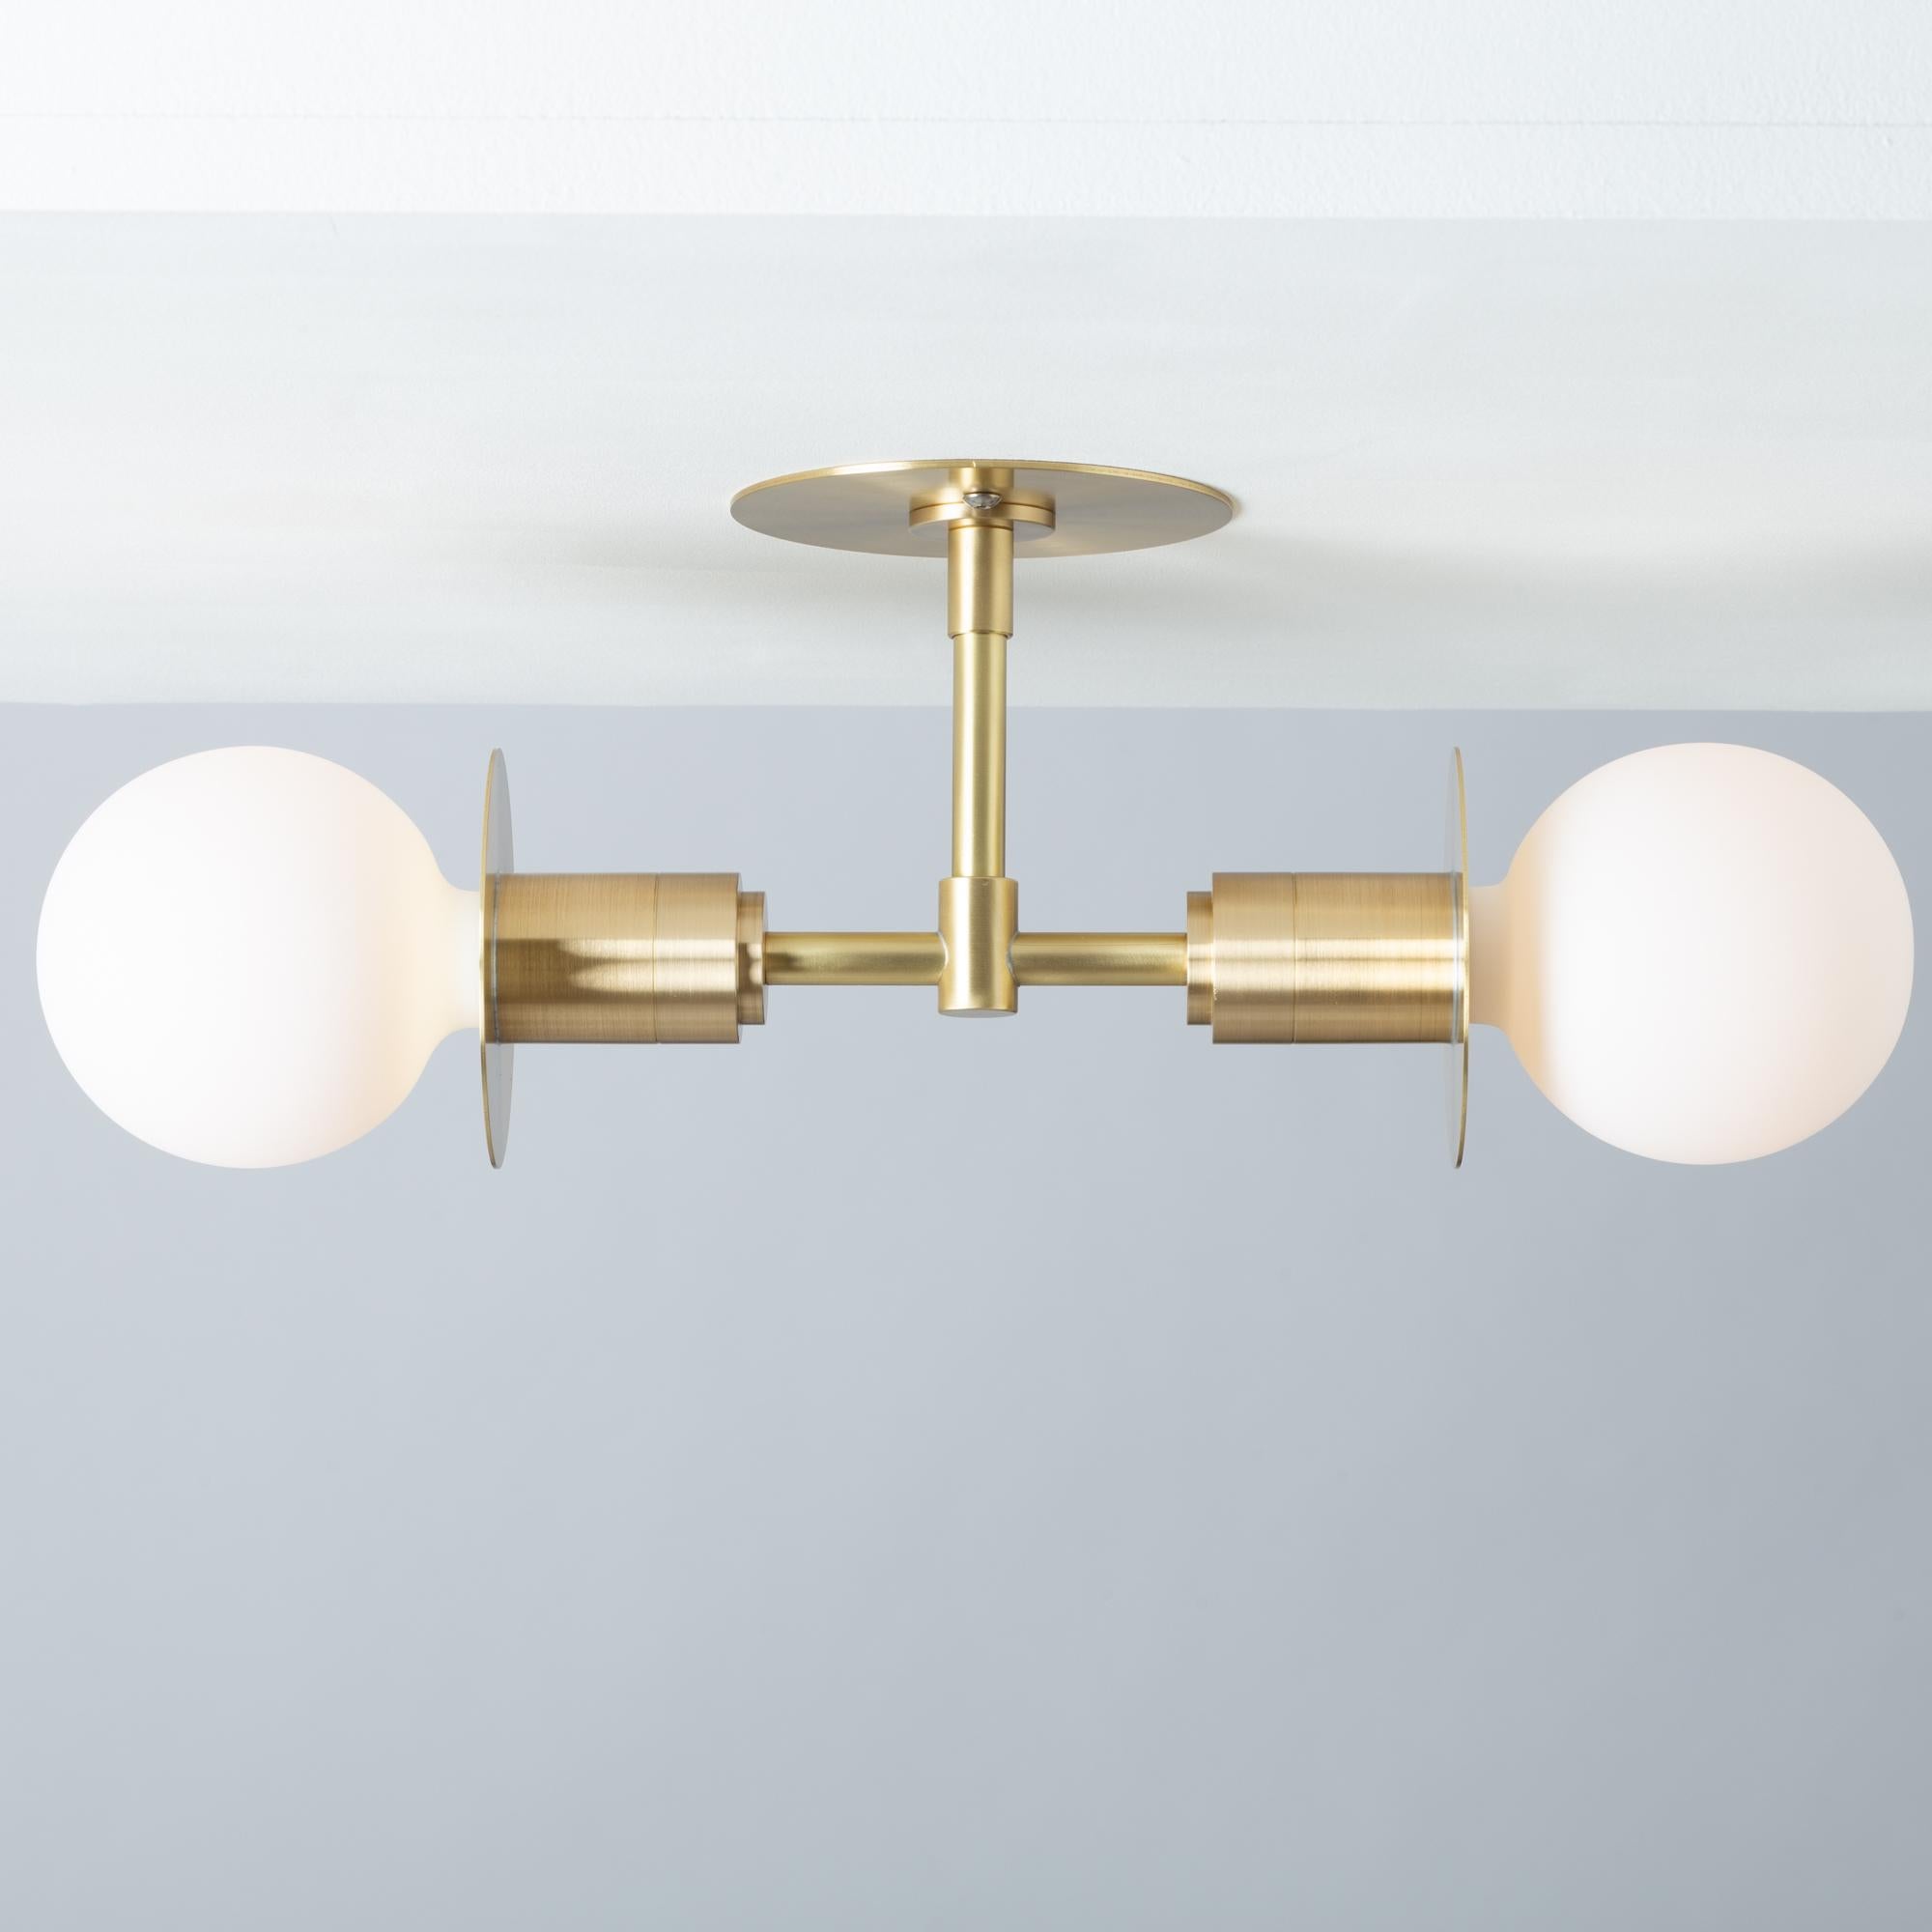 Double Sphere Disc Ceiling Light 
Brushed brass flush ceiling plate
2000K - 2800K  95CRI
1200 Dim to Warm Lumens 
Flush mount Hard Wired
Sphere III Bulbs Included
Handmade by Lights of London in Hackney Wick, London.